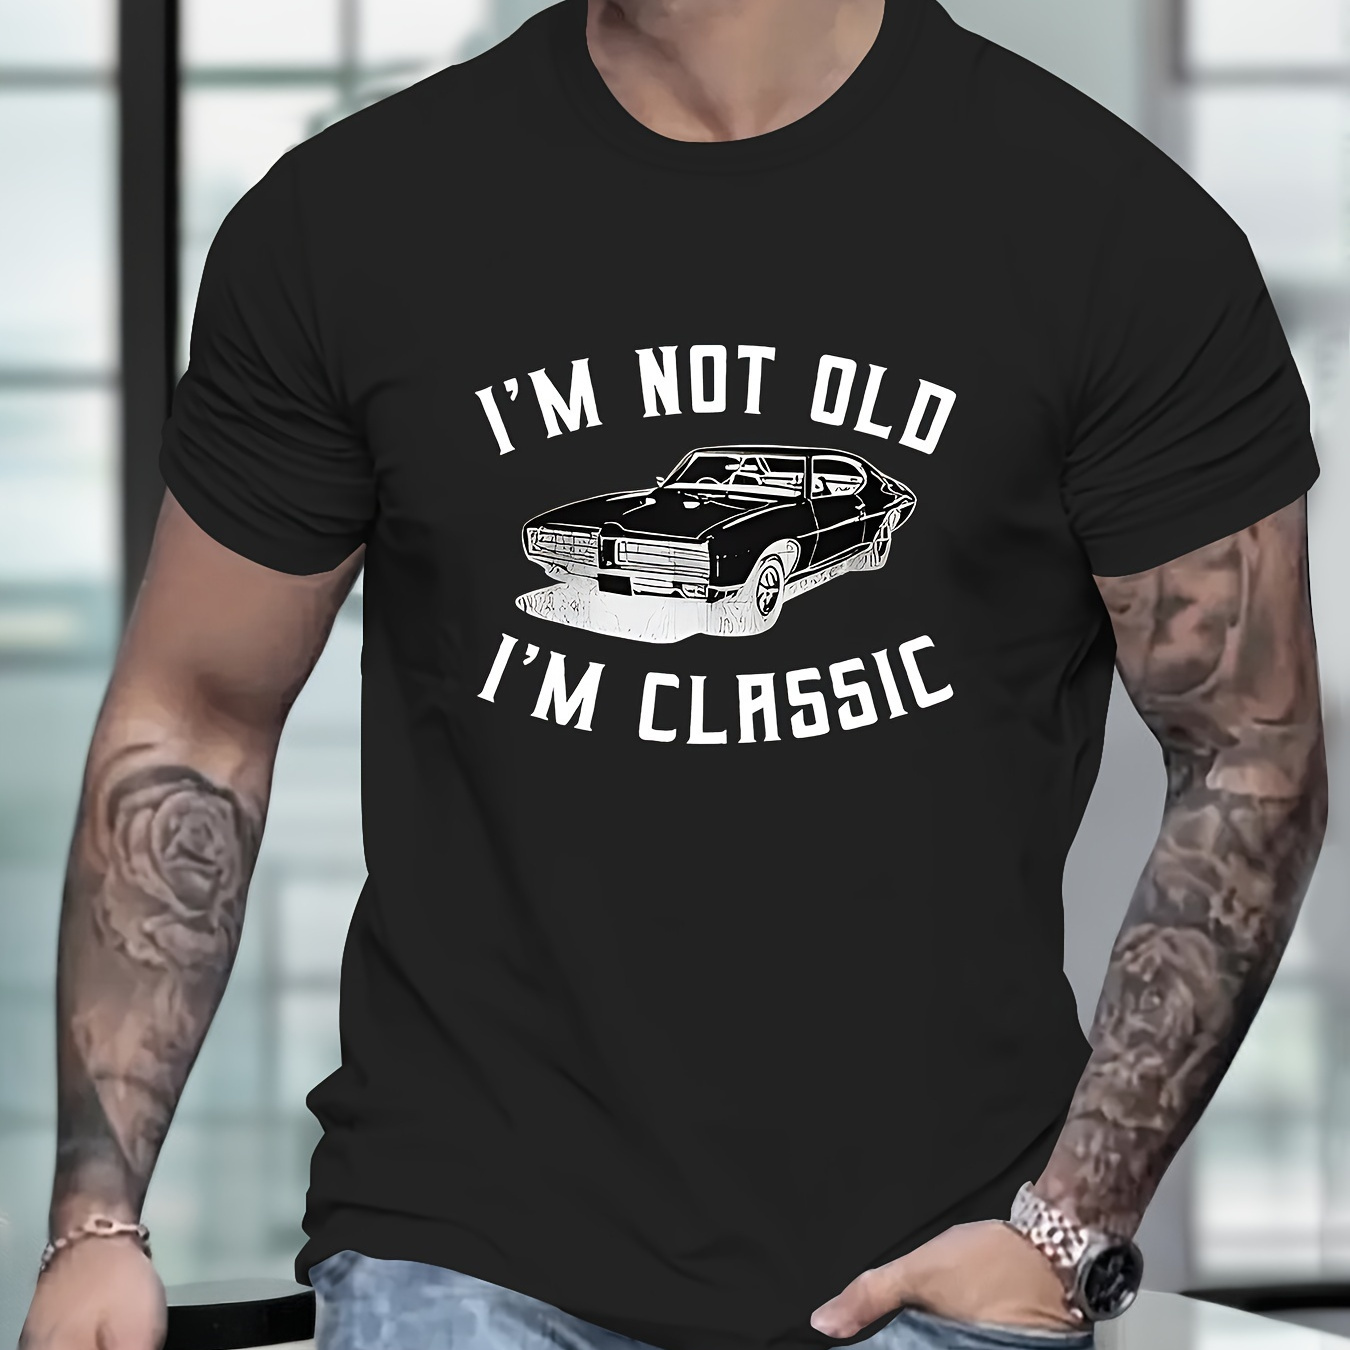 

I'm Not Old I'm Classic " Creative Print Summer Casual T-shirt Short Sleeve For Men, Sporty Leisure Style, Fashion Crew Neck Top For Daily Wear